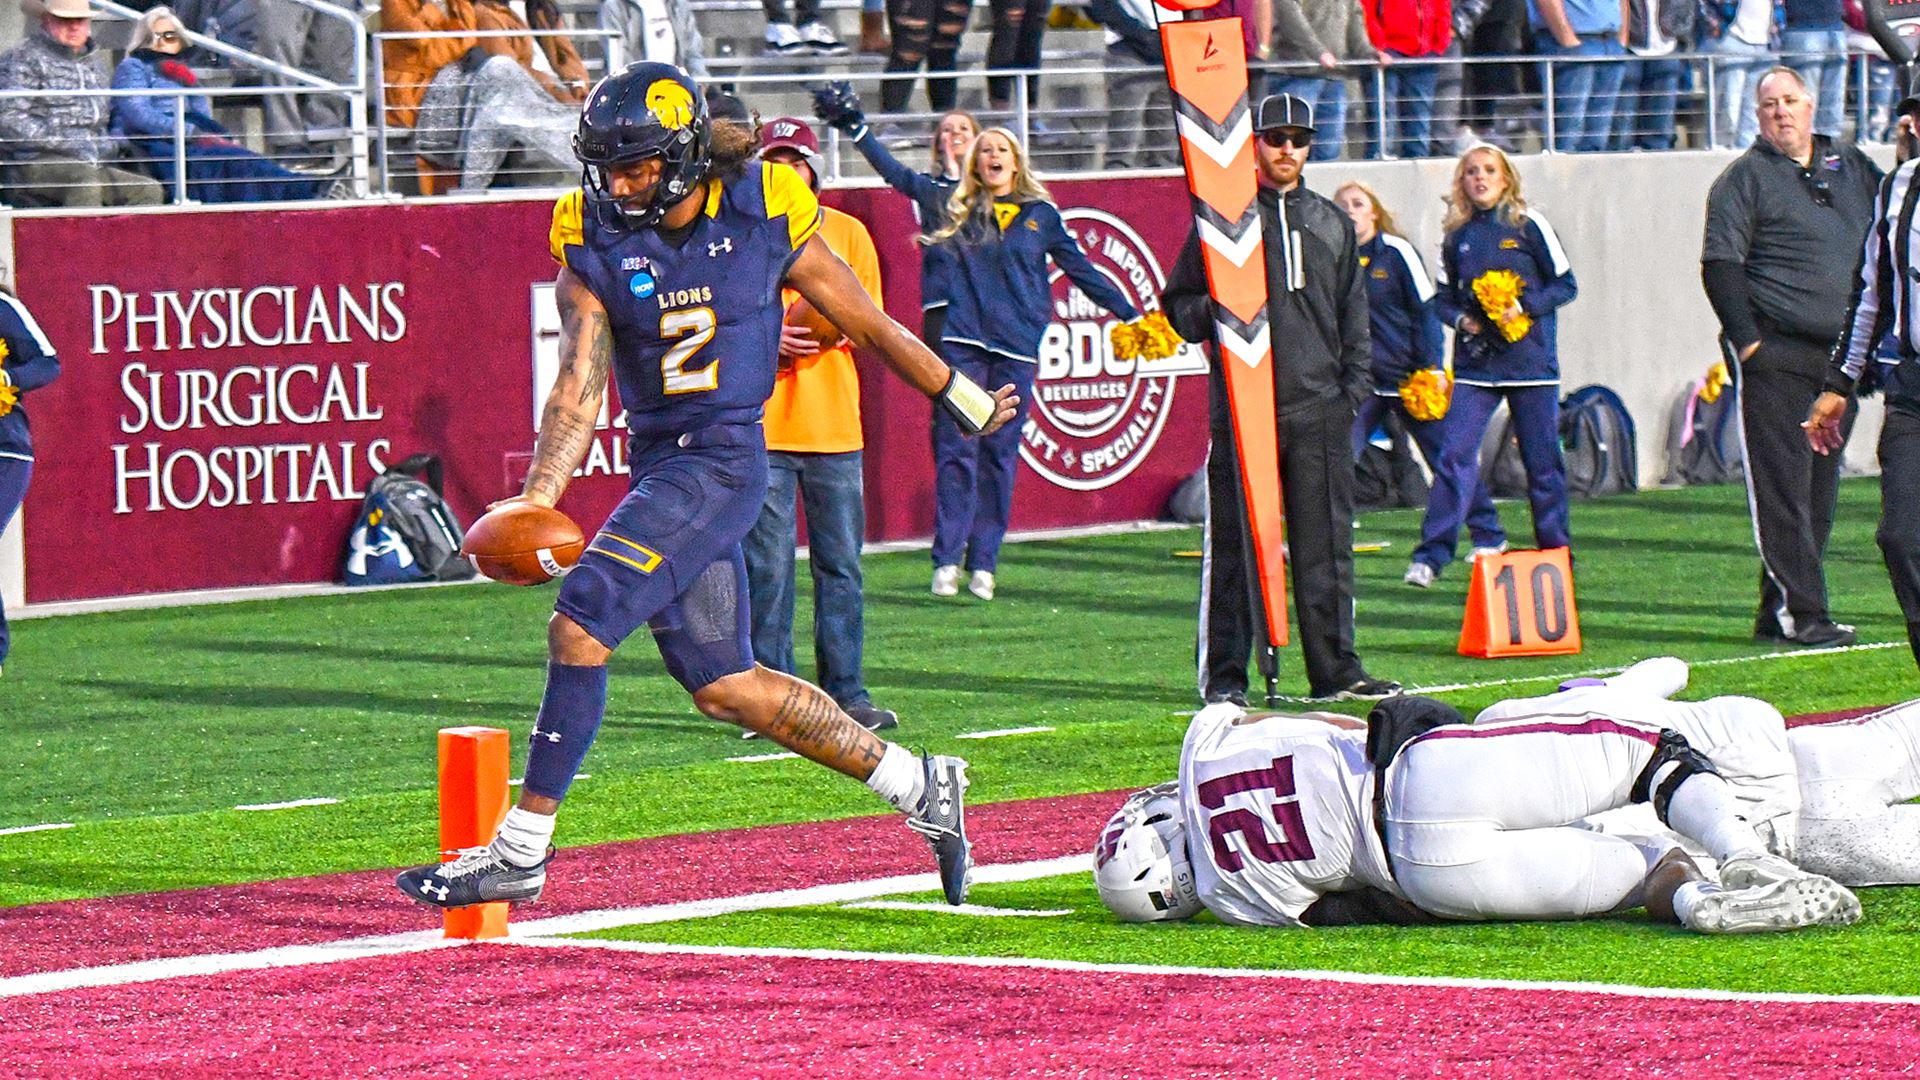 TEXAS A&M-COMMERCE FOOTBALL: Fourth quarter rally leads No. 24 Lions to 34-20 win at West Texas